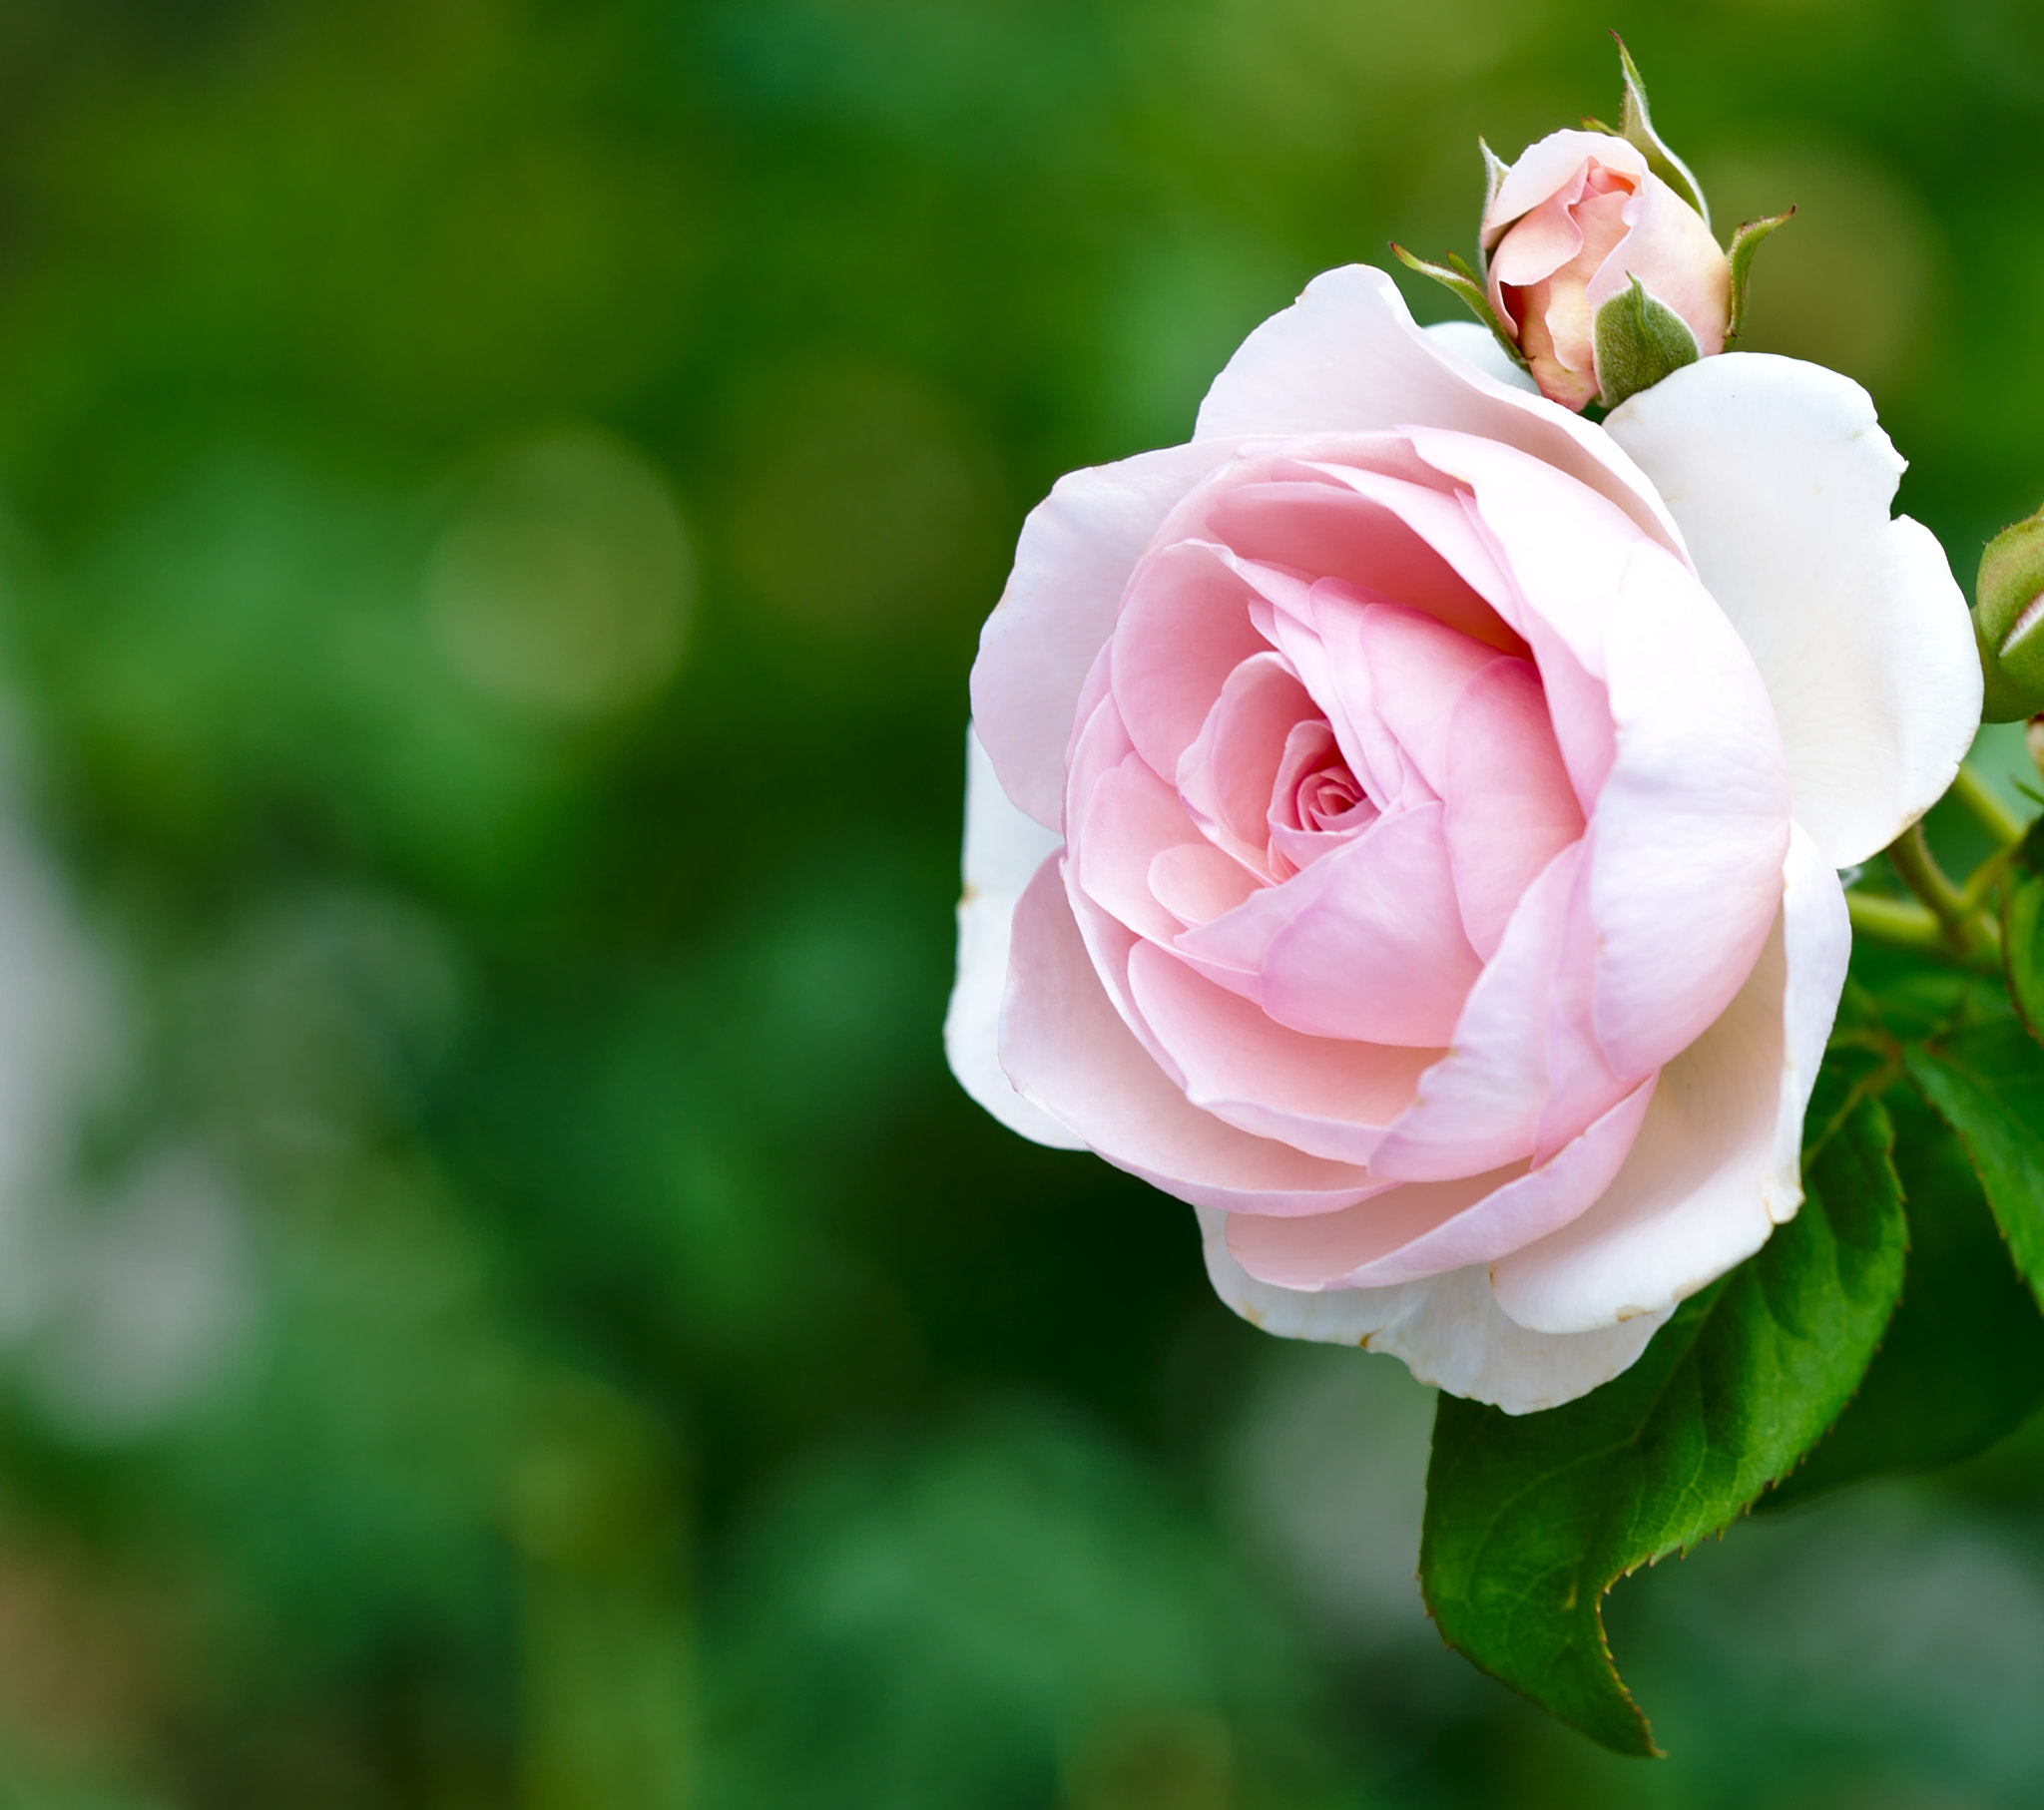 ZEISS Otus 85mm F1.4 sample photo. "heritage" - a hybrid rose ii photography